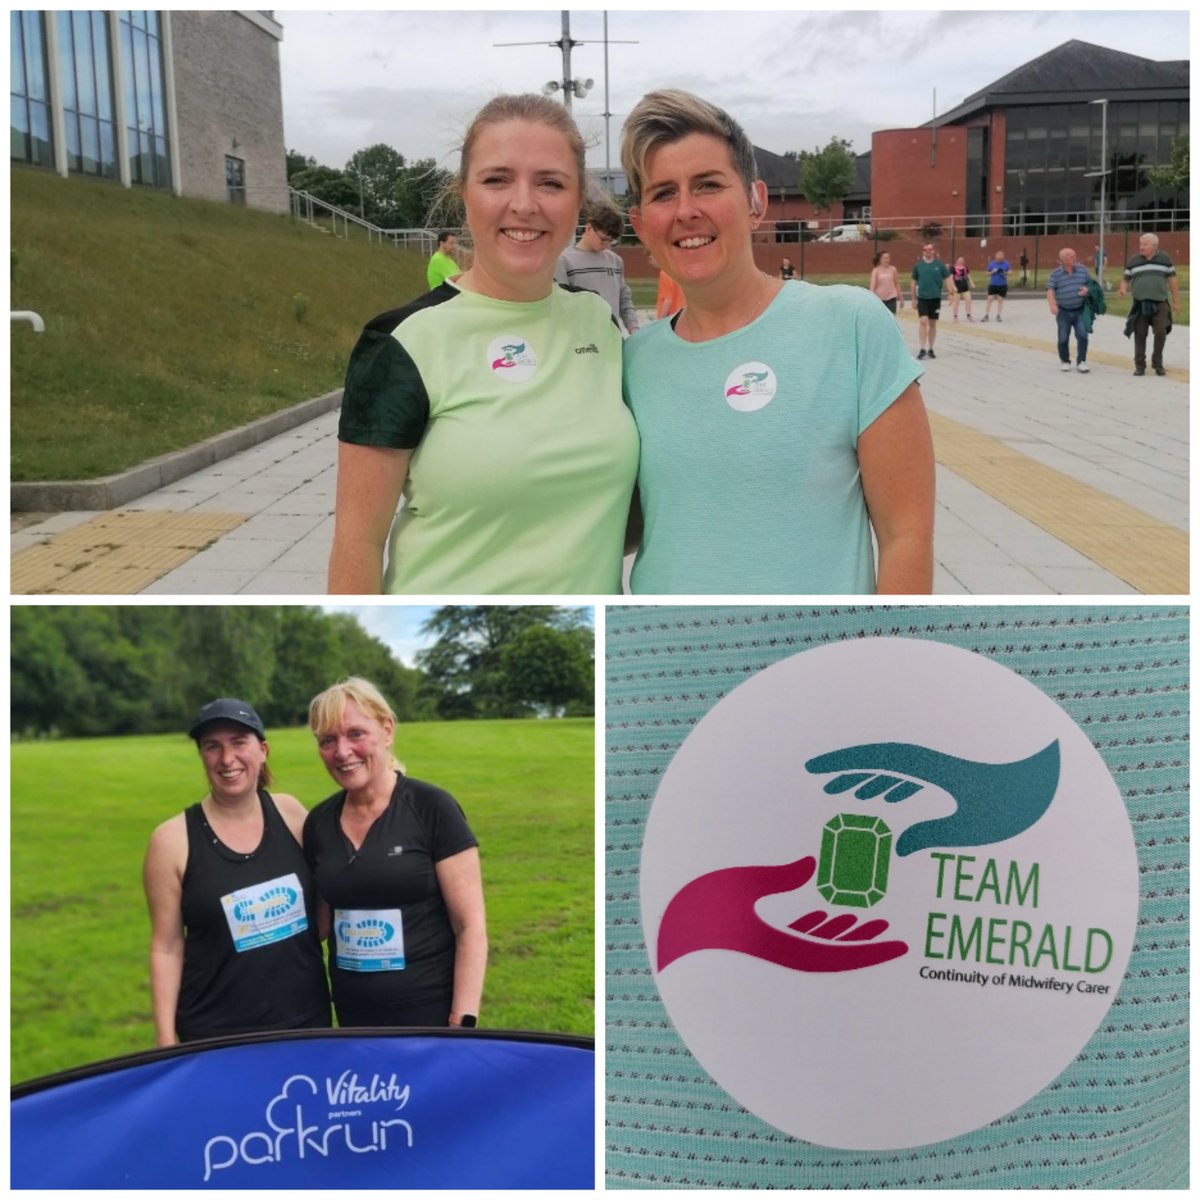 #CoMCteamemerald at City Parkrun, Craigavon and Armagh Parkrun celebrating 75 years of the NHS #shsct